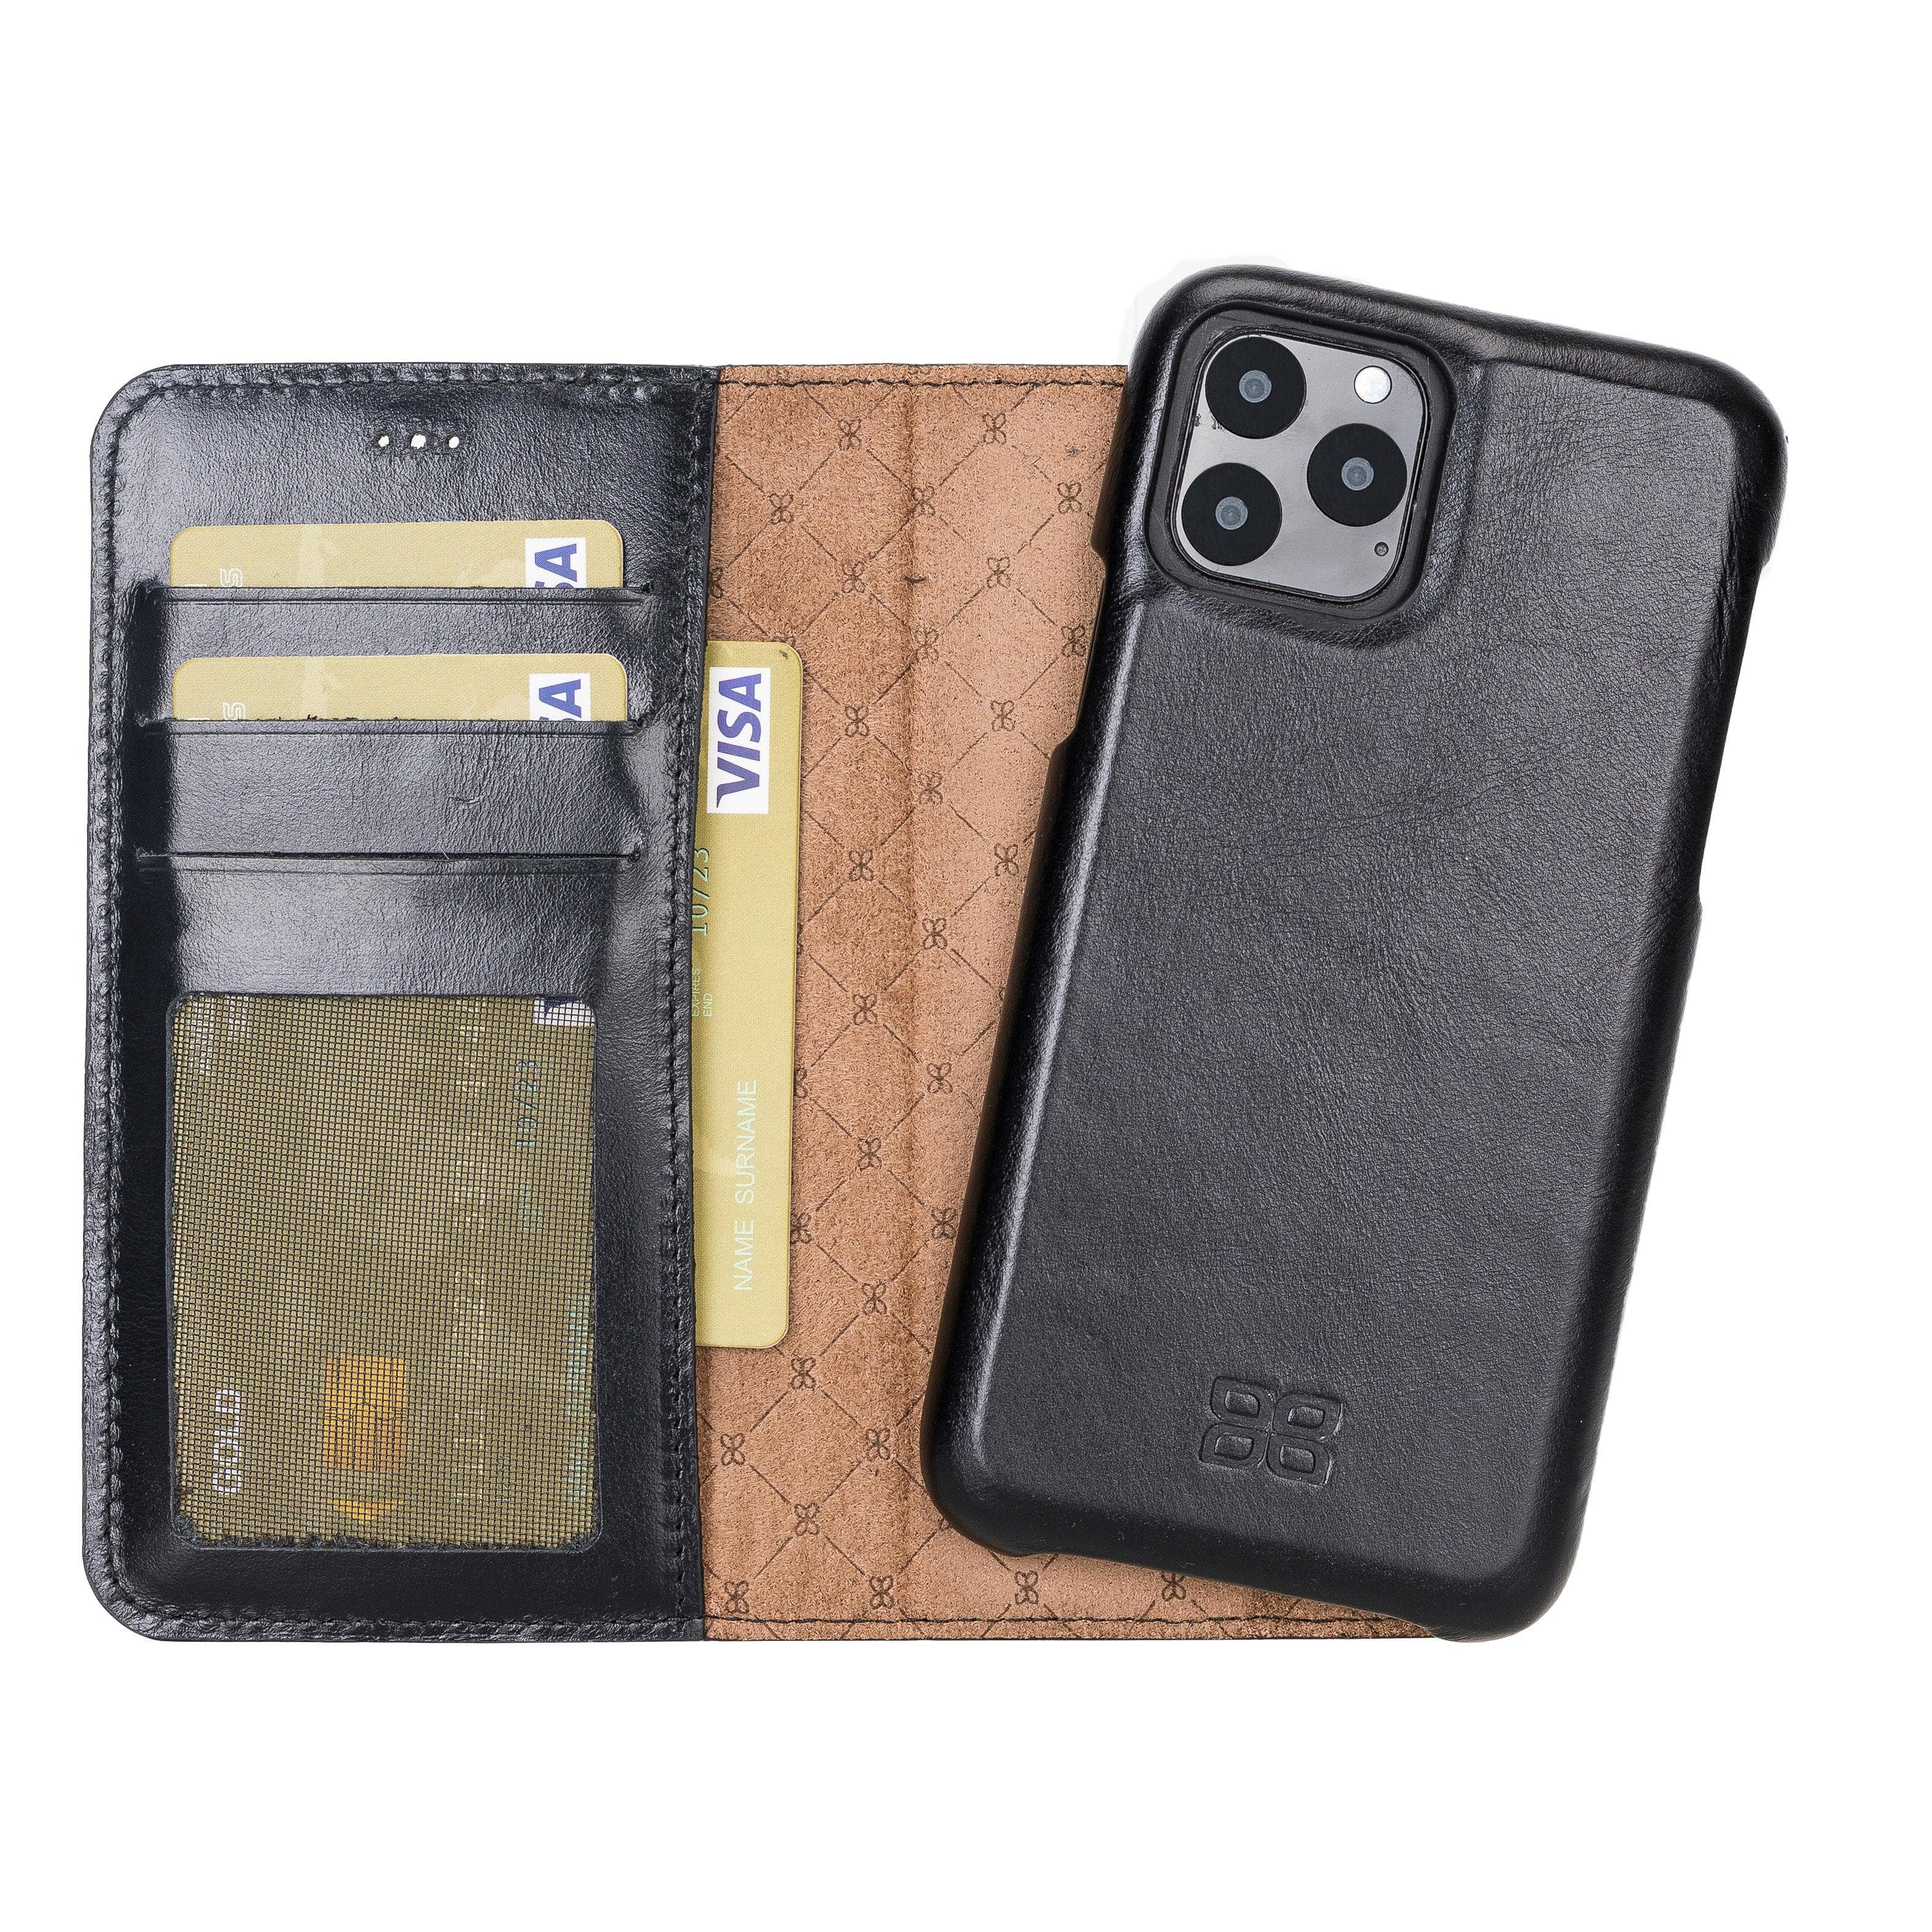 Detachable Fully Covering Leather Wallet Case For Apple iPhone 11 Series iPhone 11 Pro / Black Bouletta LTD